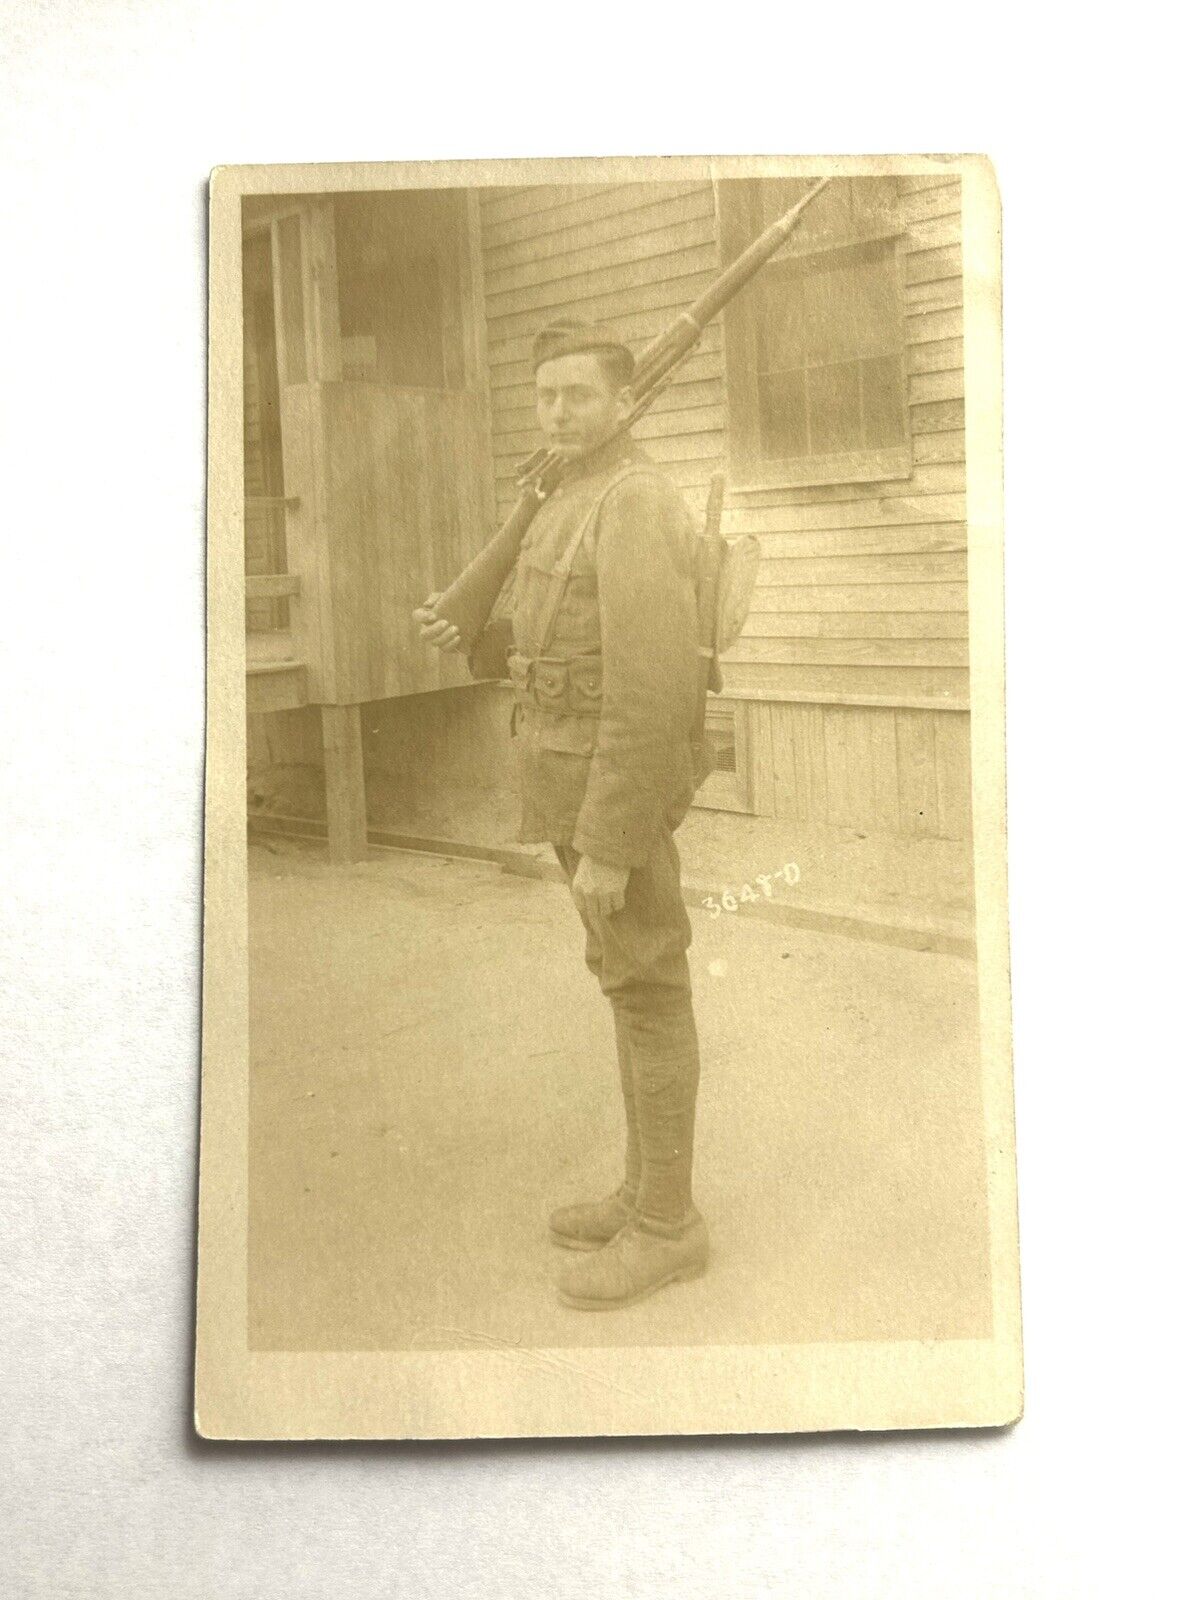 WW1 WWI armed Soldier Photo Post Card